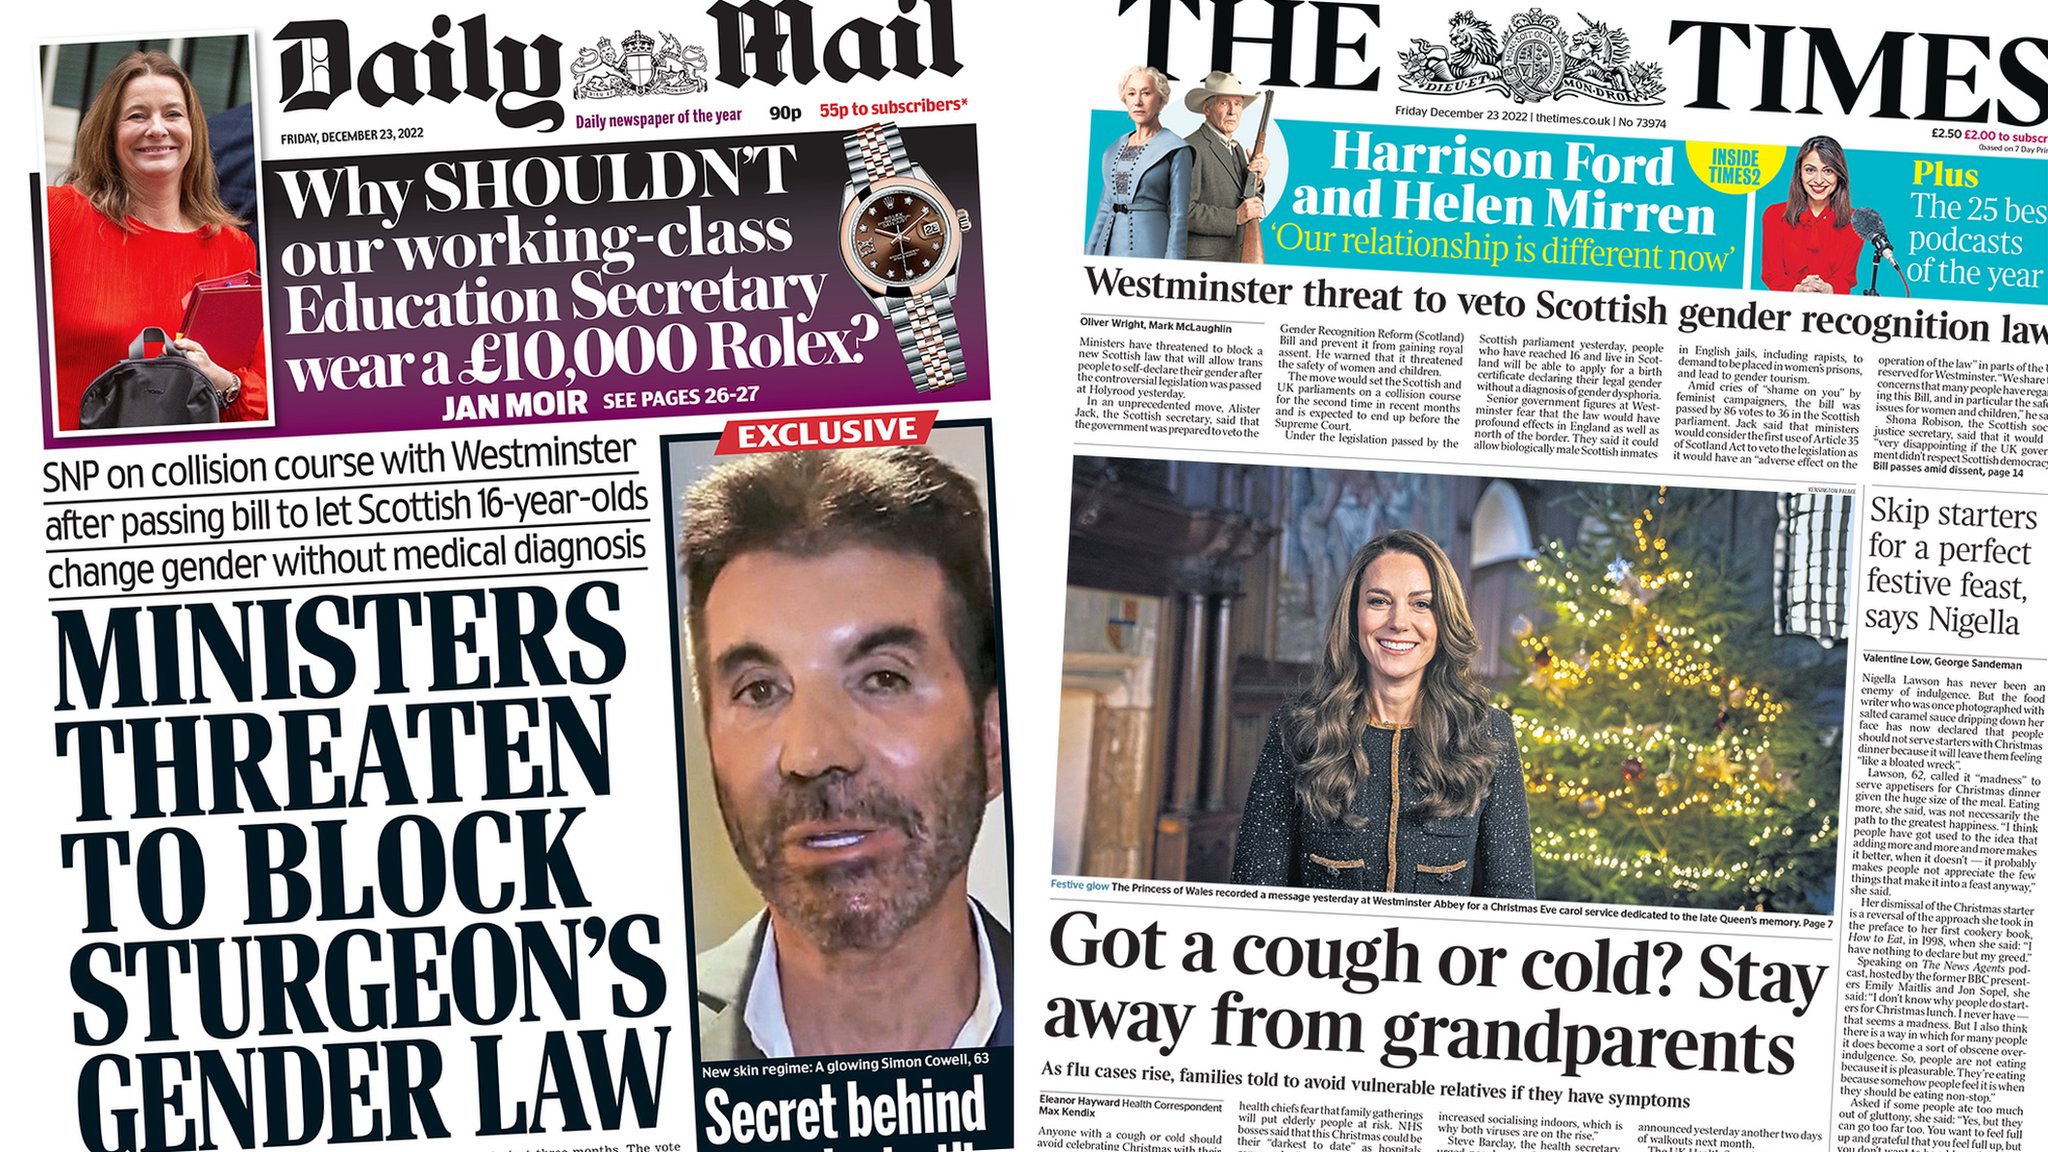 Newspaper Headlines Threat To Gender Law And Stay Away With Flu From Granny c News